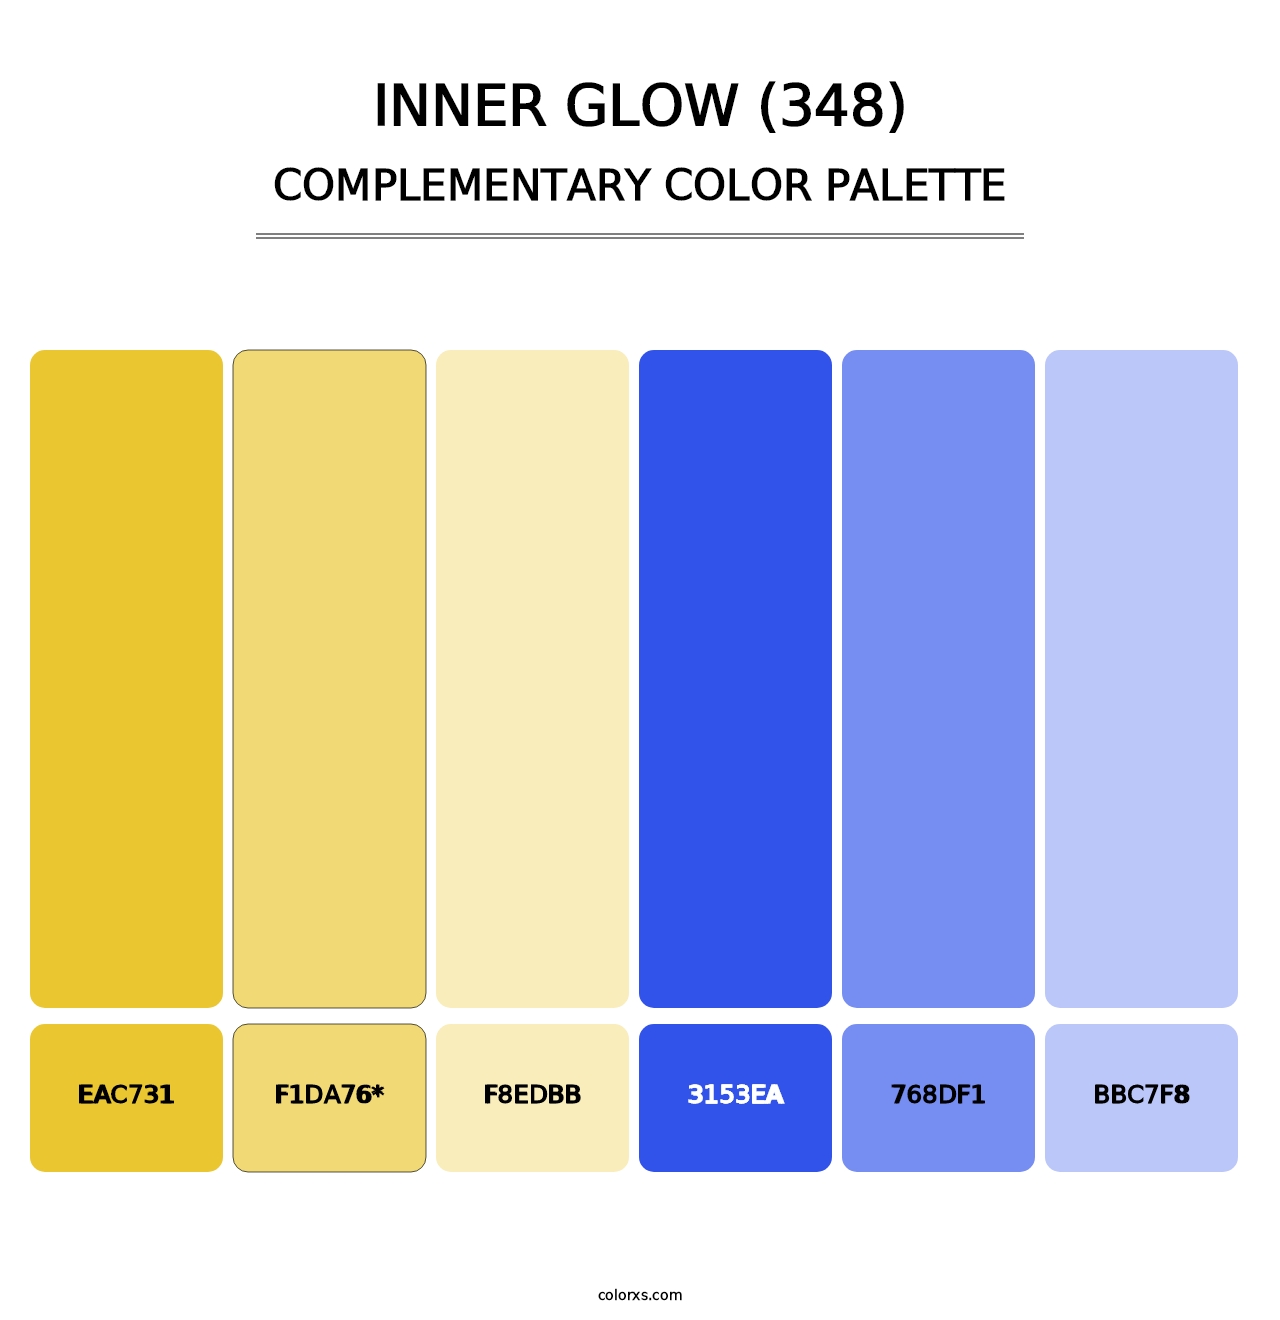 Inner Glow (348) - Complementary Color Palette